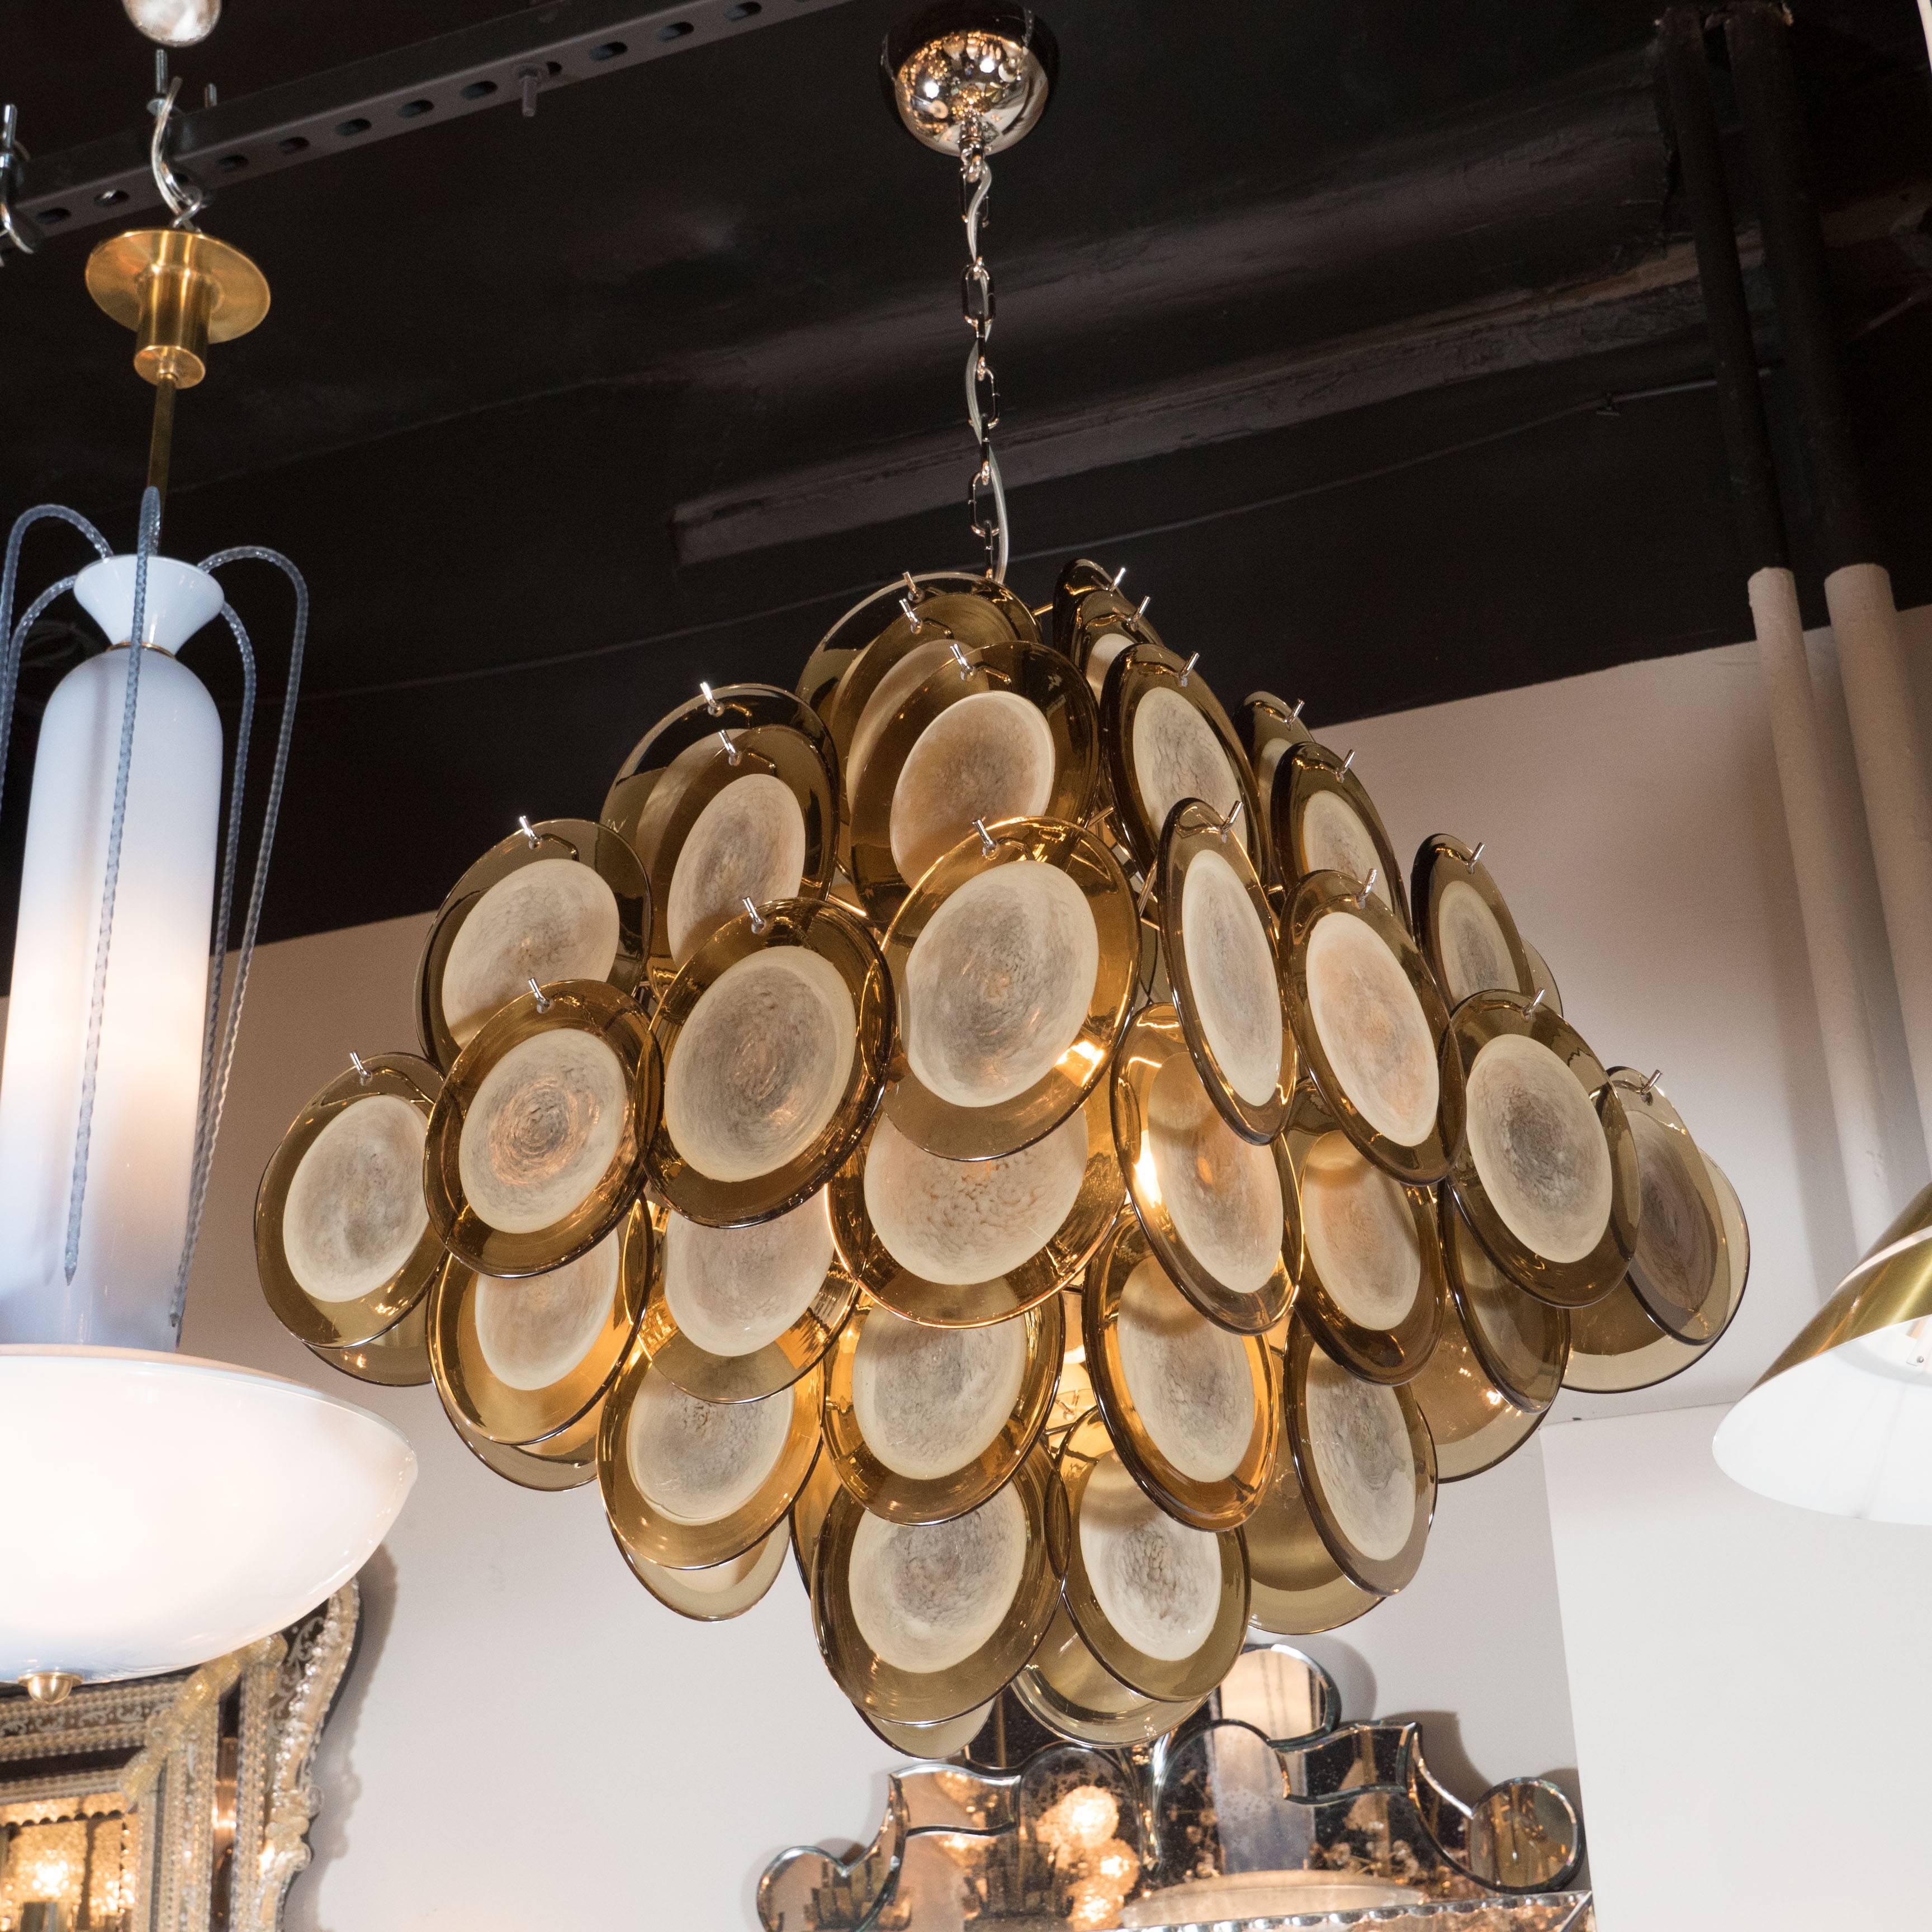 Modernist Pagoda-Style diamond shape chandelier with smoked topaz disks, Italy, 21st century. This exceptional and impressive chandelier by Vistosi displays 62 Murano glass discs suspended in a diamond formation. Each disc is handblown Murano glass